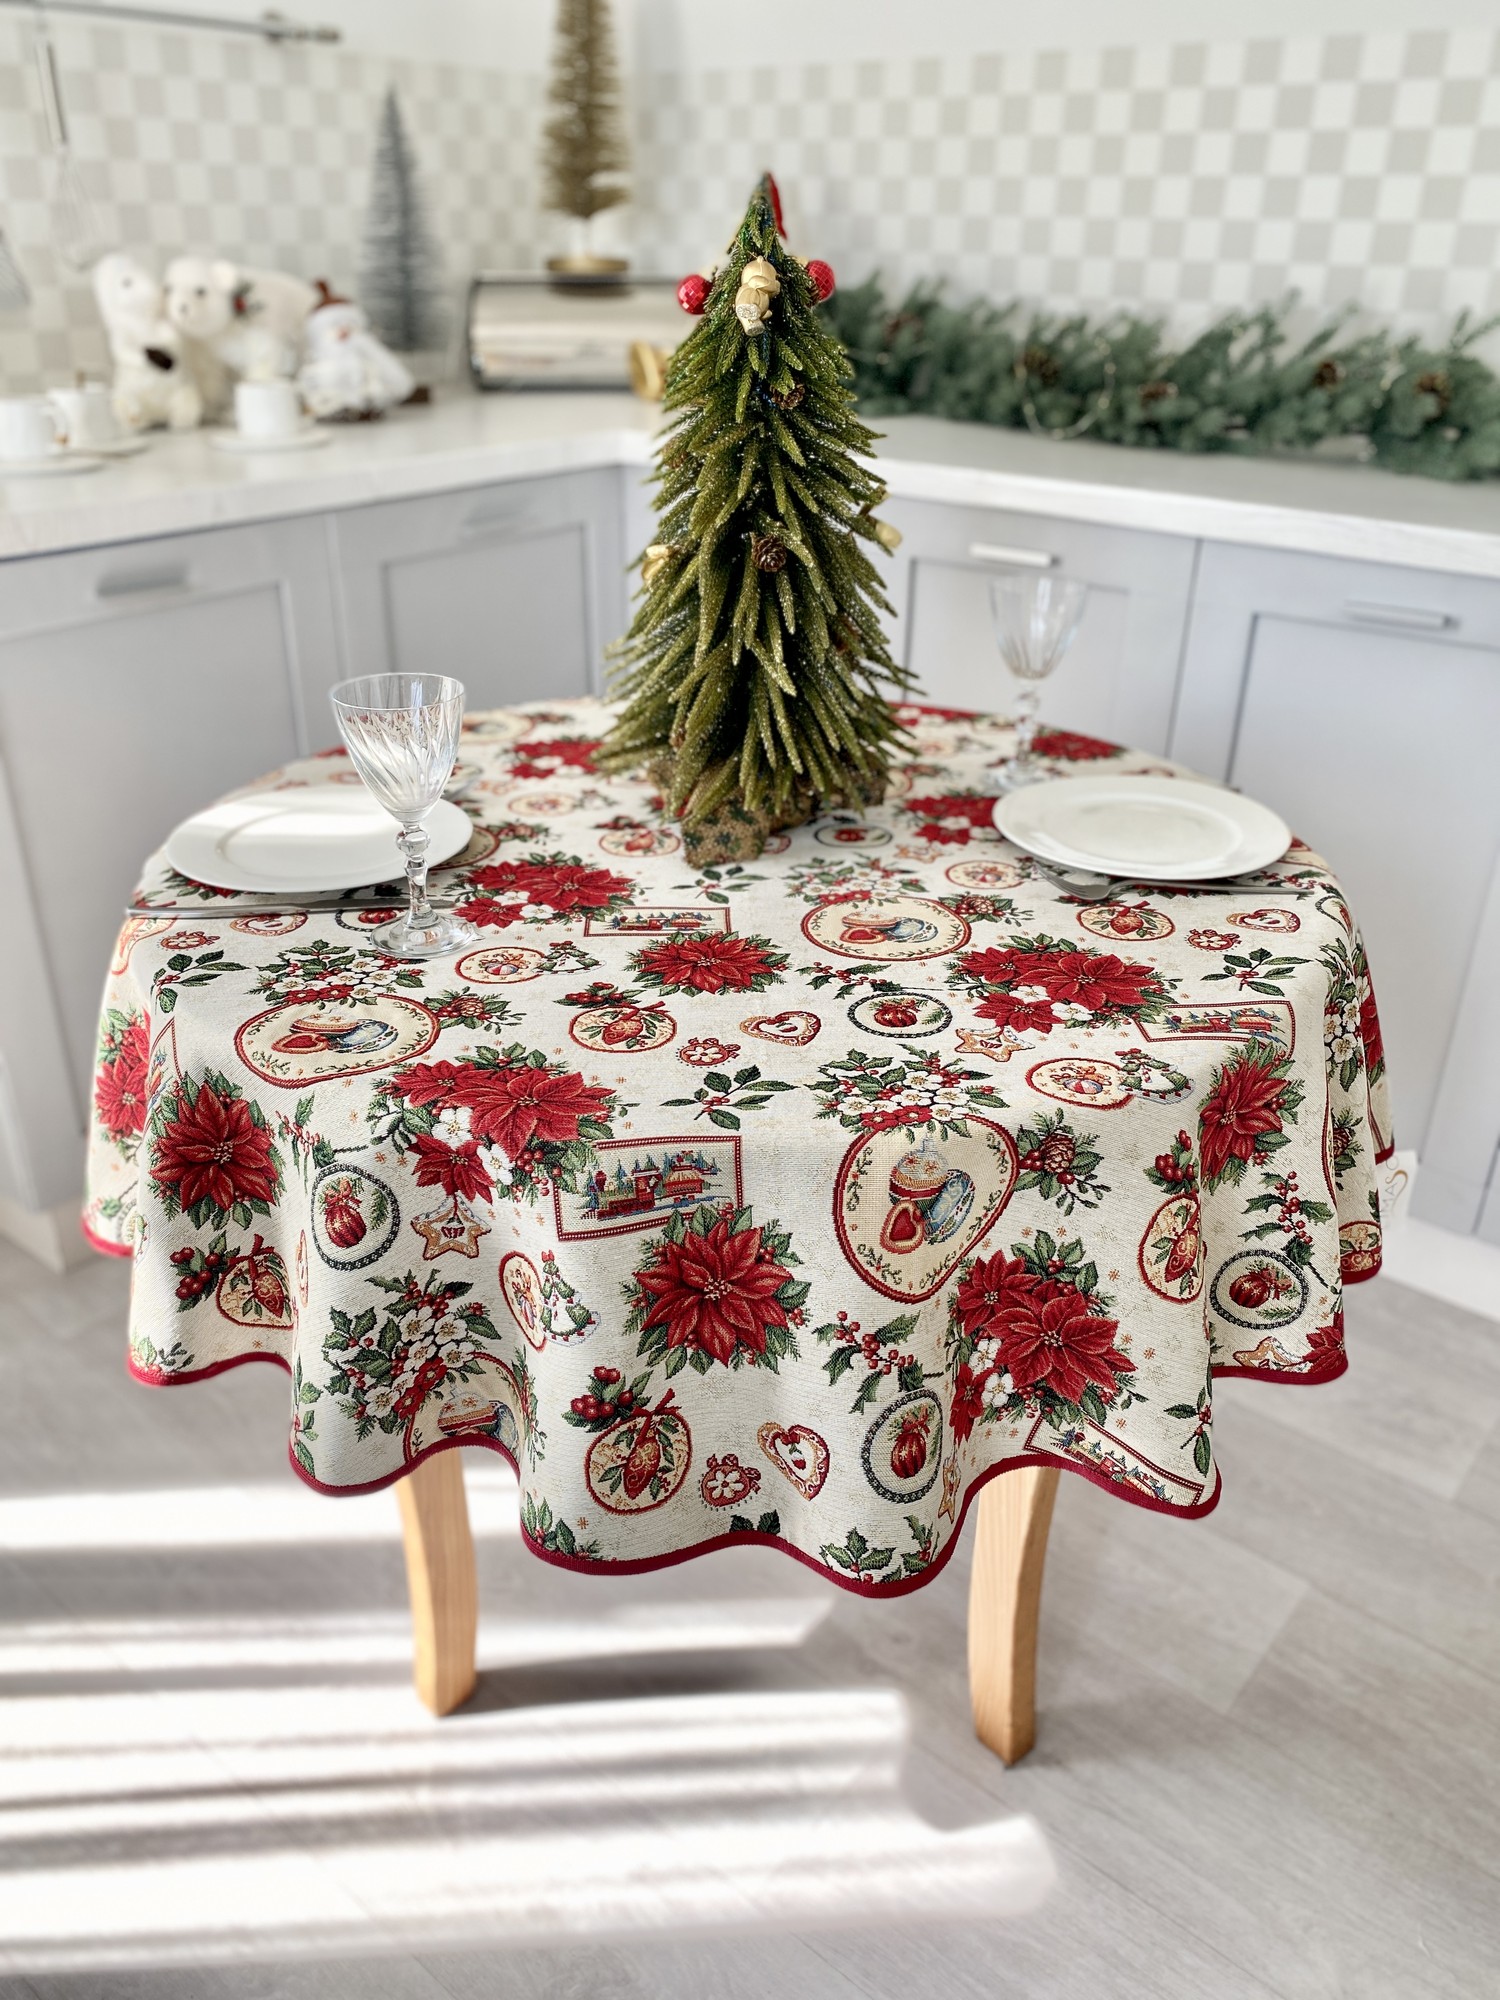 Christmas tapestry tablecloth for round table ø180 cm (70 in), with gold lurex round festive tablecloth